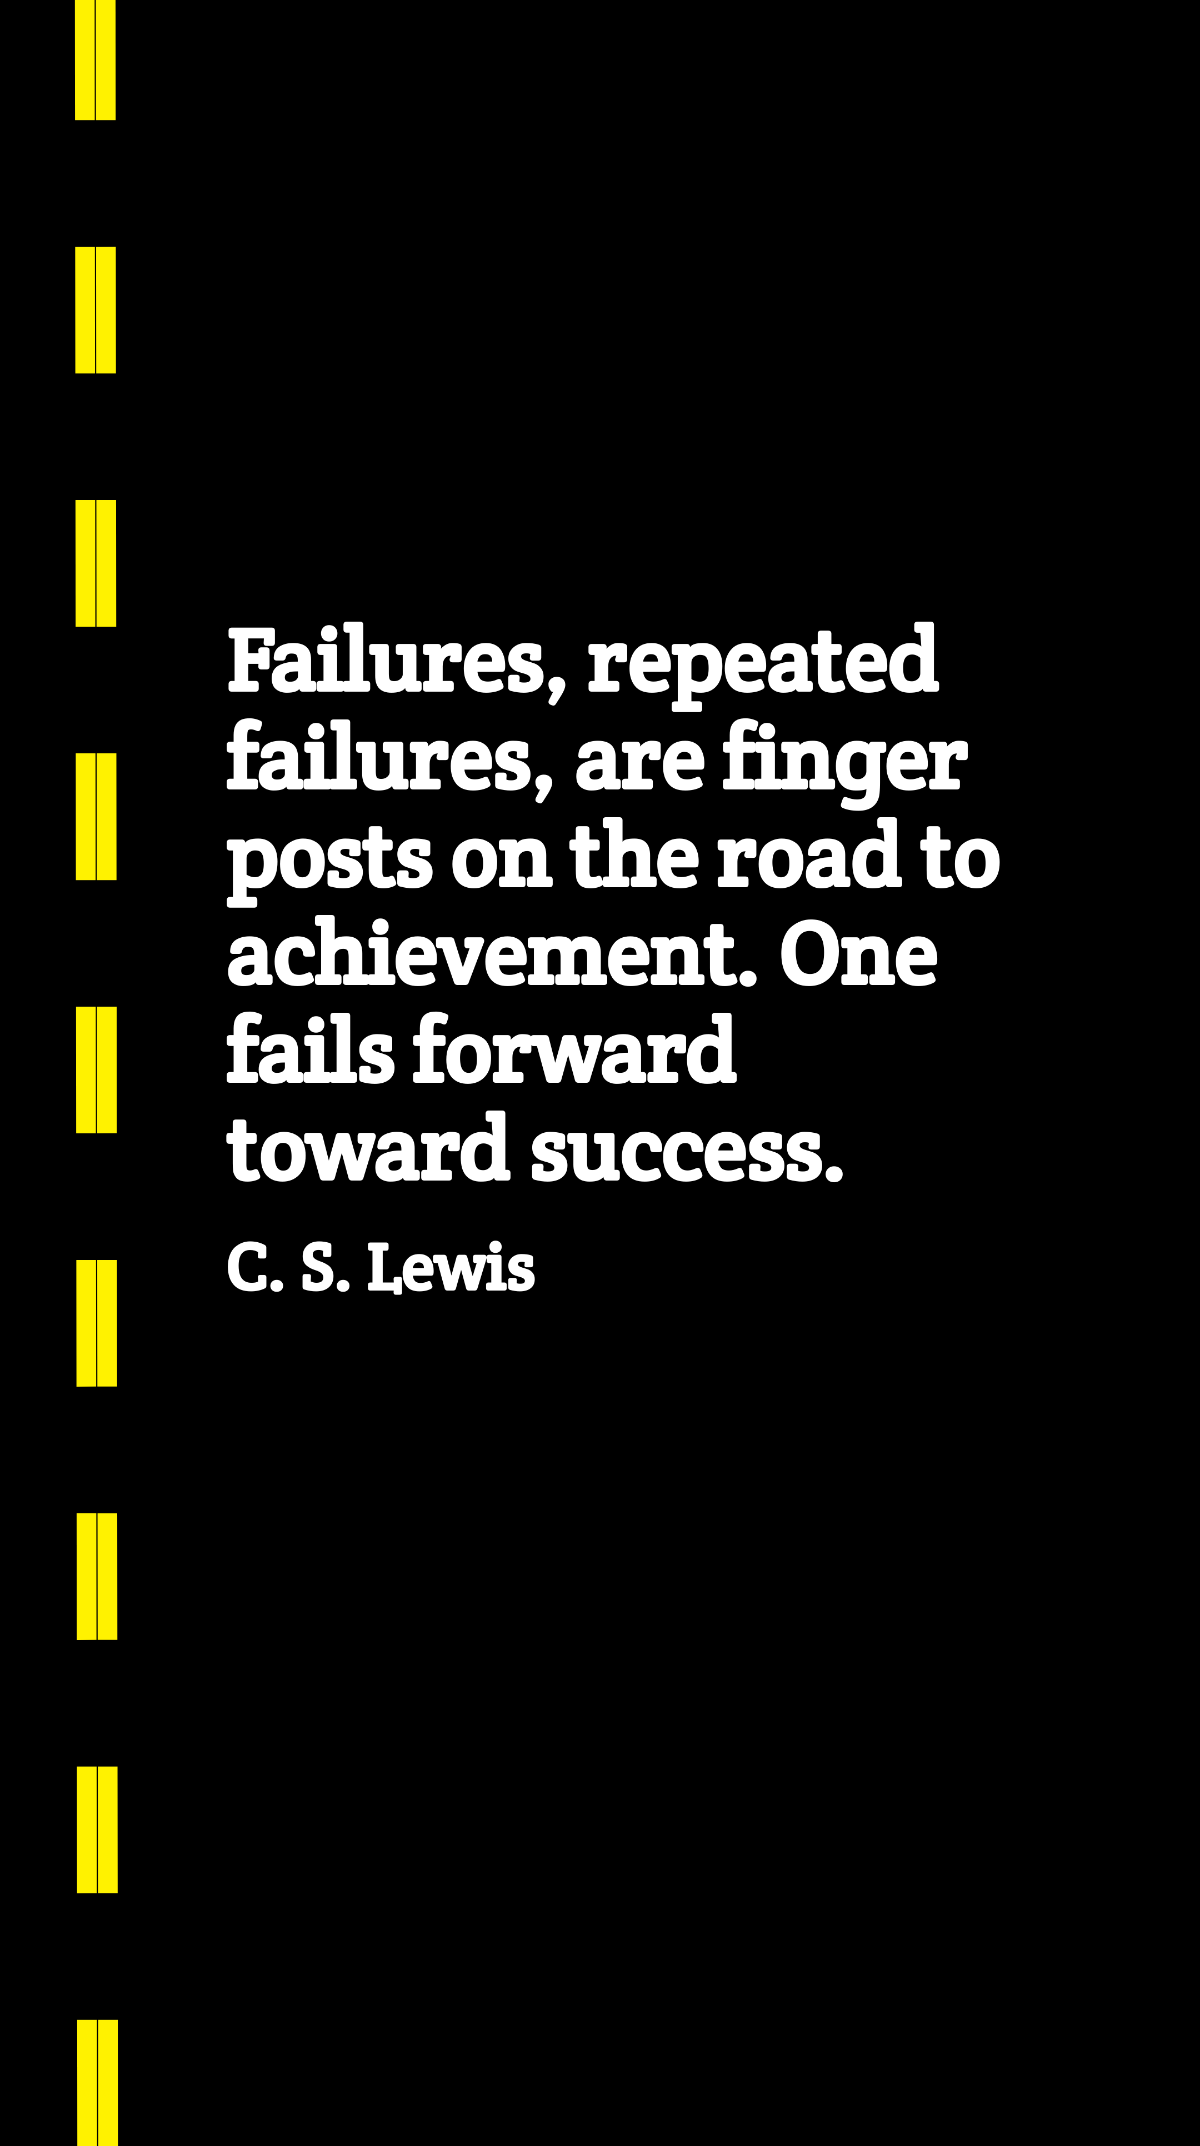 C. S. Lewis - Failures, repeated failures, are finger posts on the road to achievement. One fails forward toward success. Template